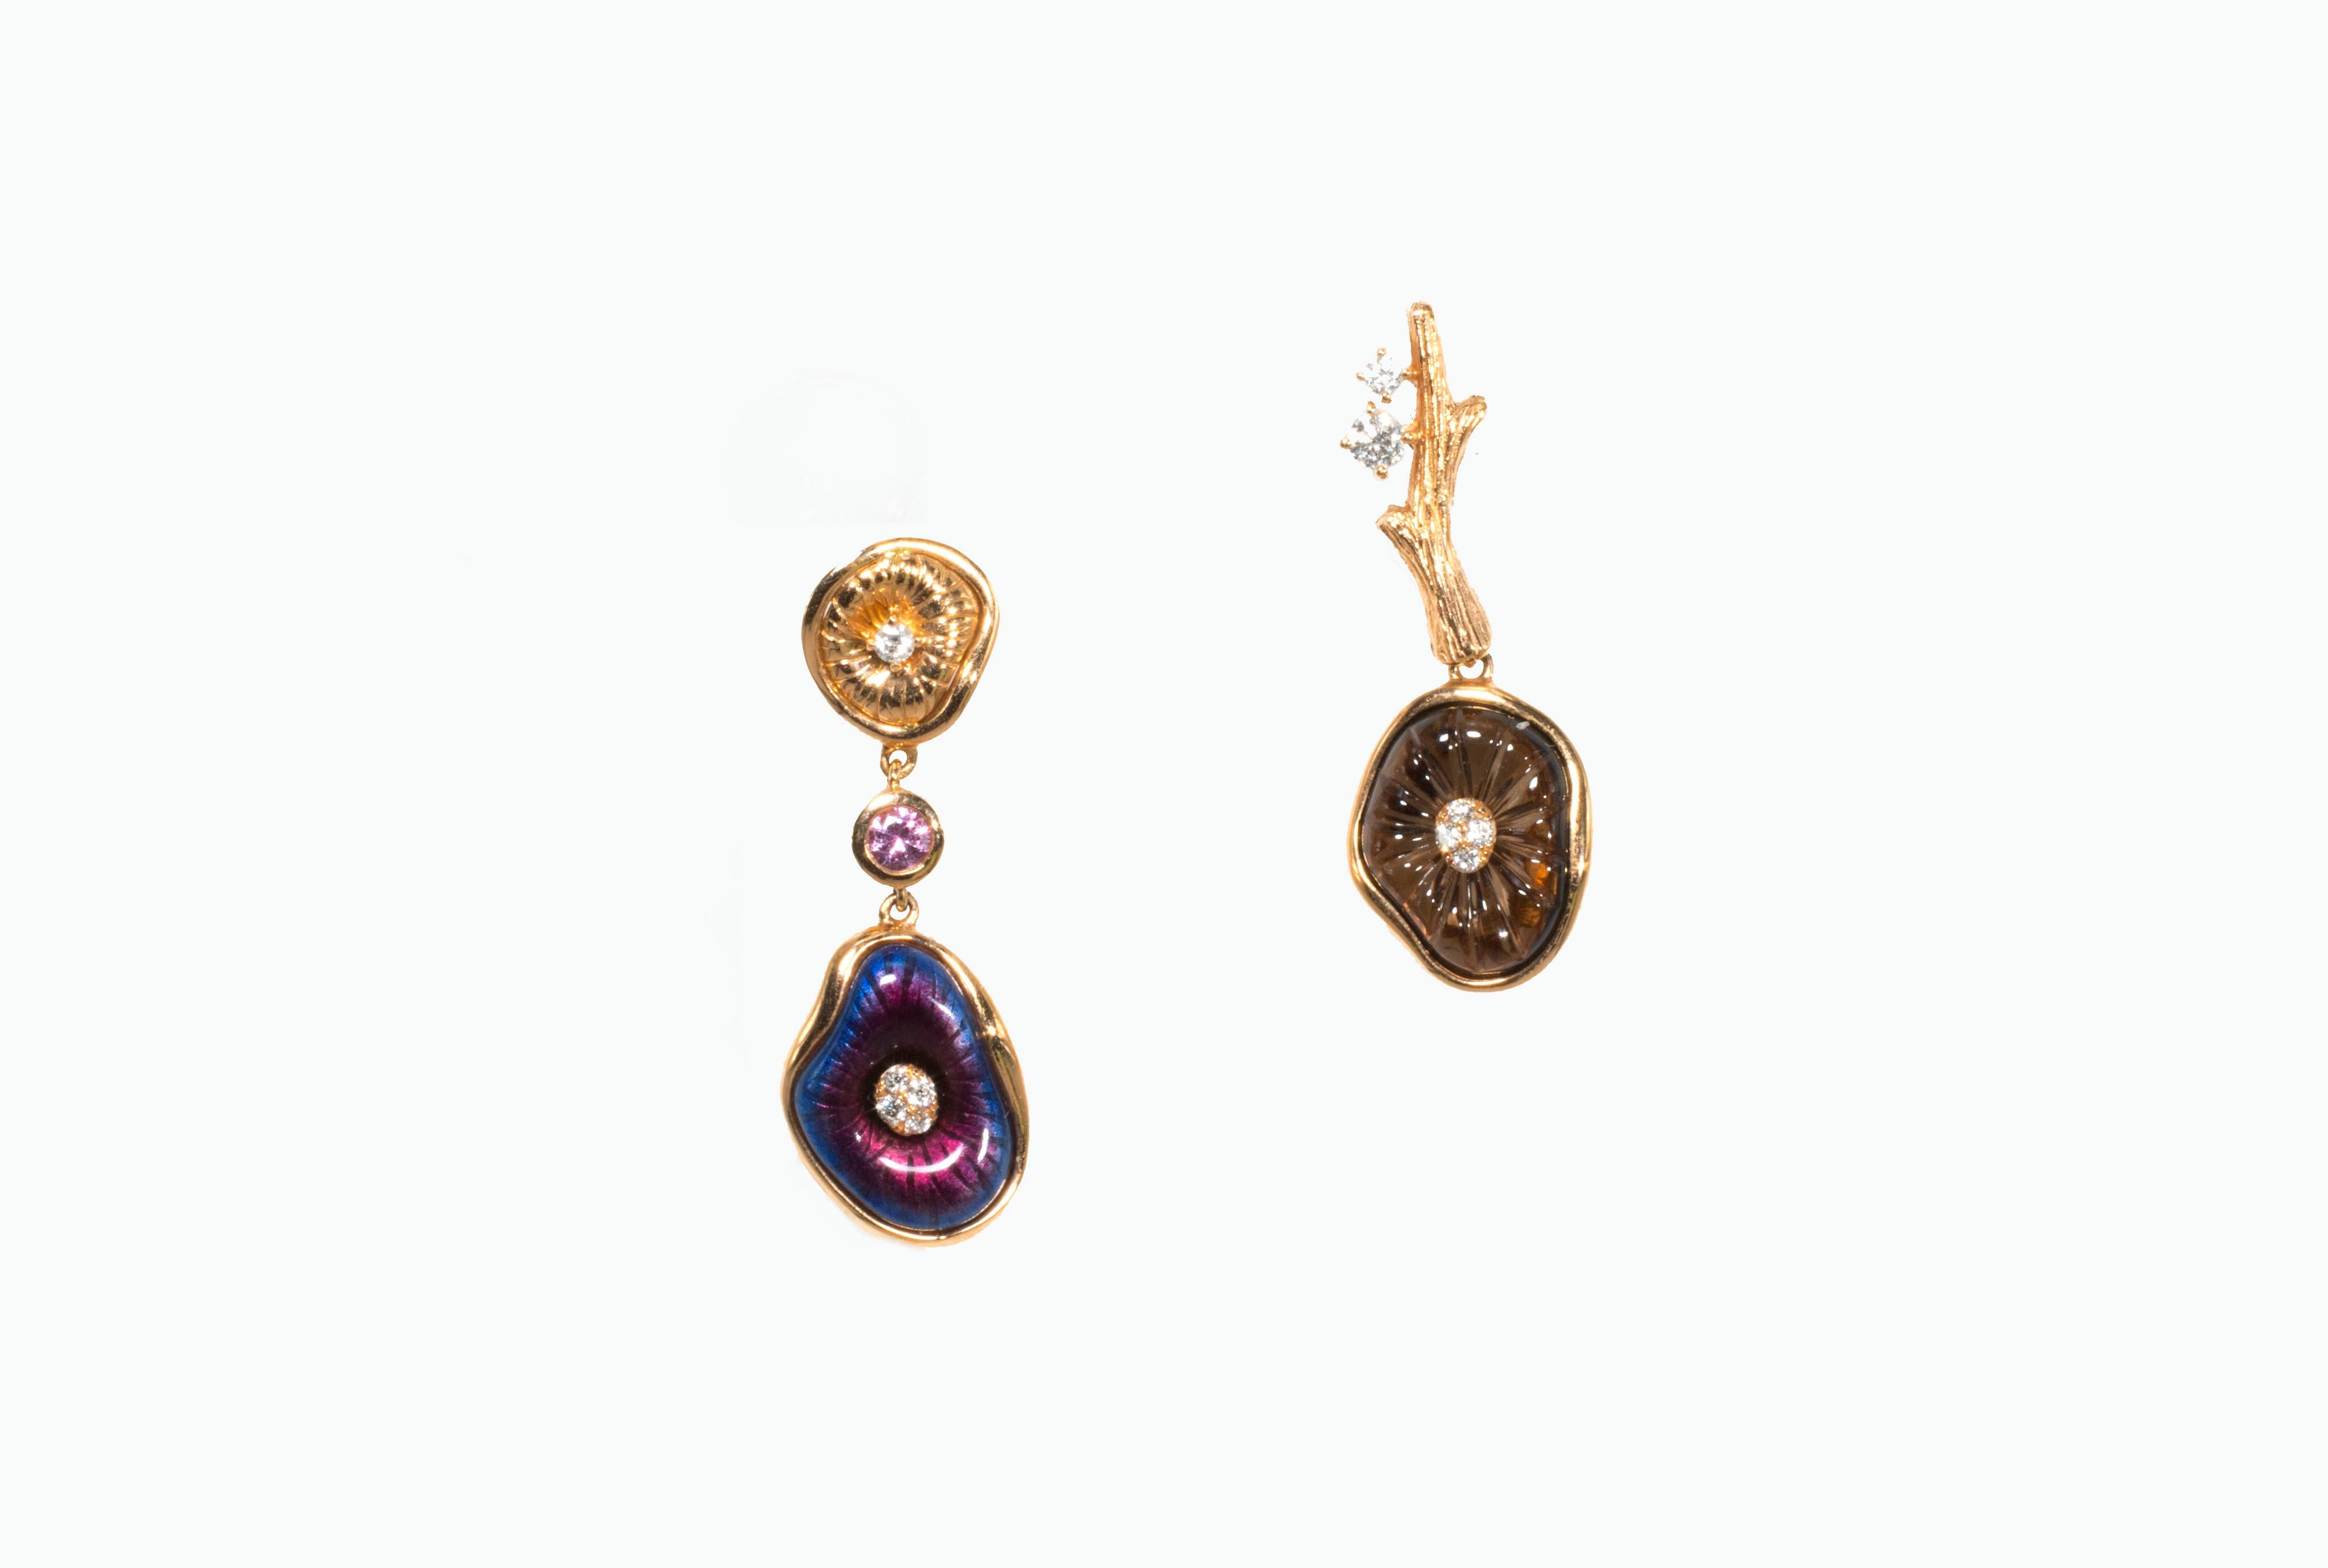 Hot Enamel Mushroom Earrings in 18K Rose Gold set with pink sapphire, carved smoky quartz and diamond
